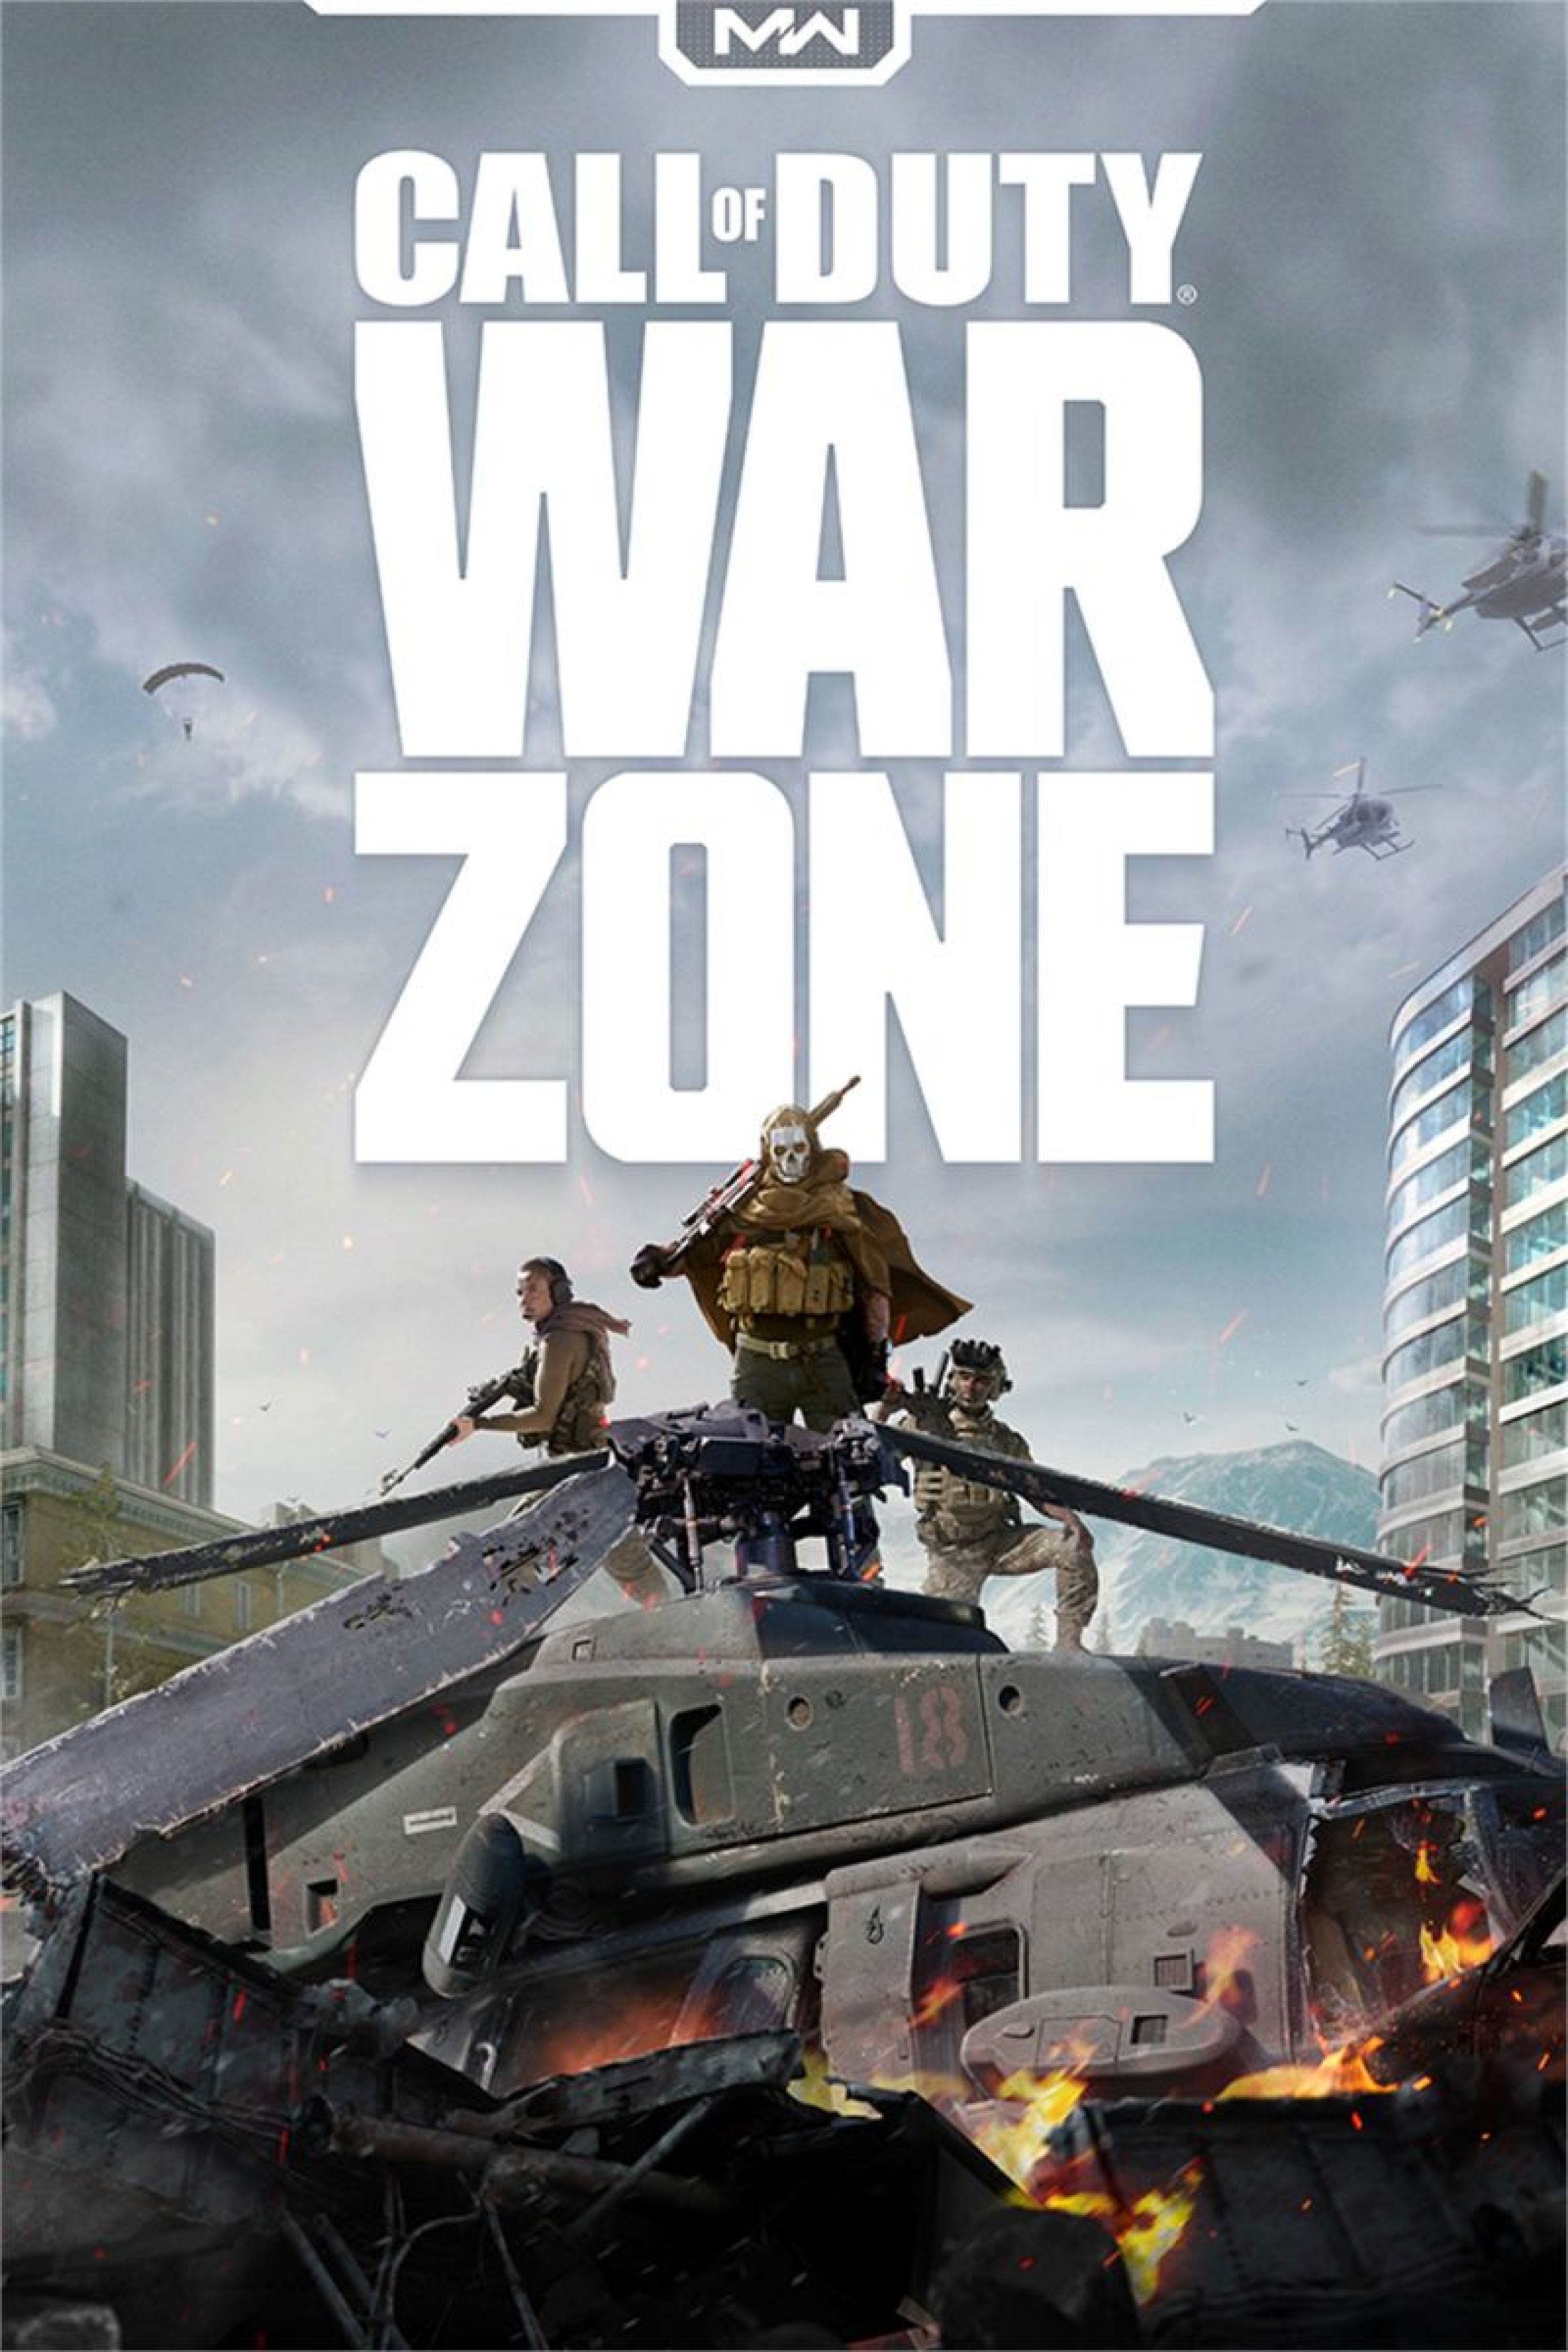 ghost warzone download free